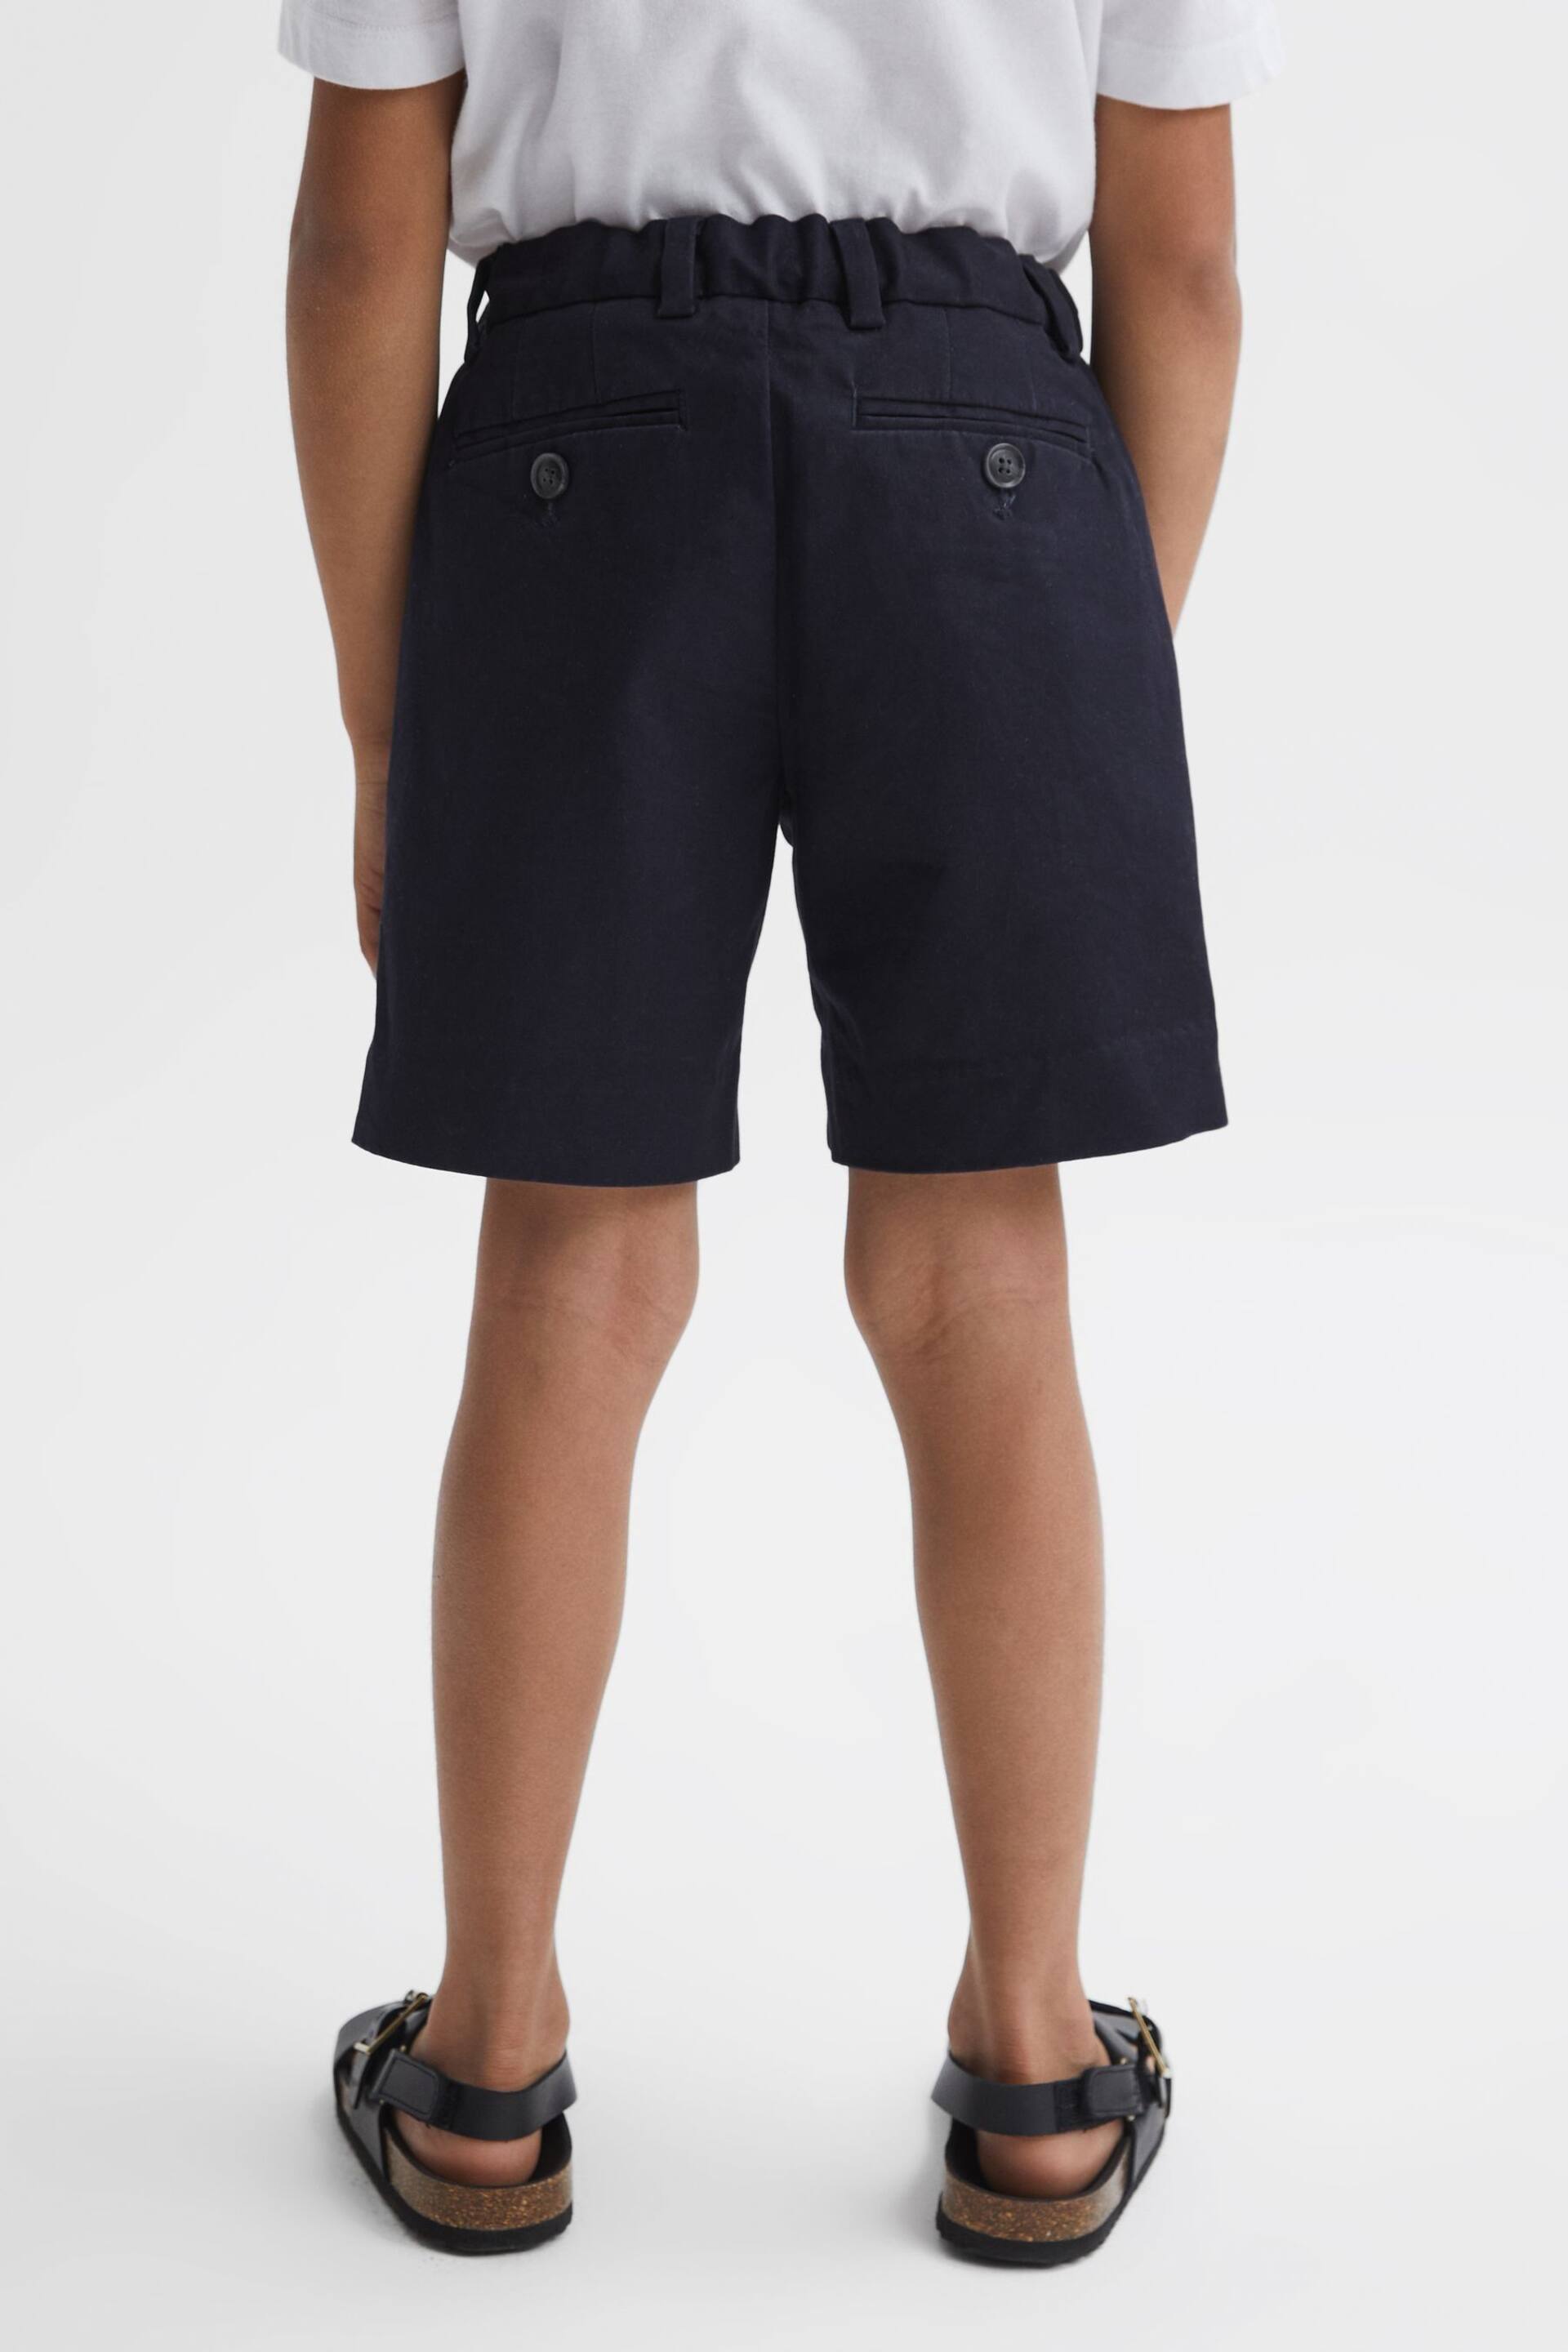 Reiss Navy Wicket Senior Casual Chino Shorts - Image 4 of 5